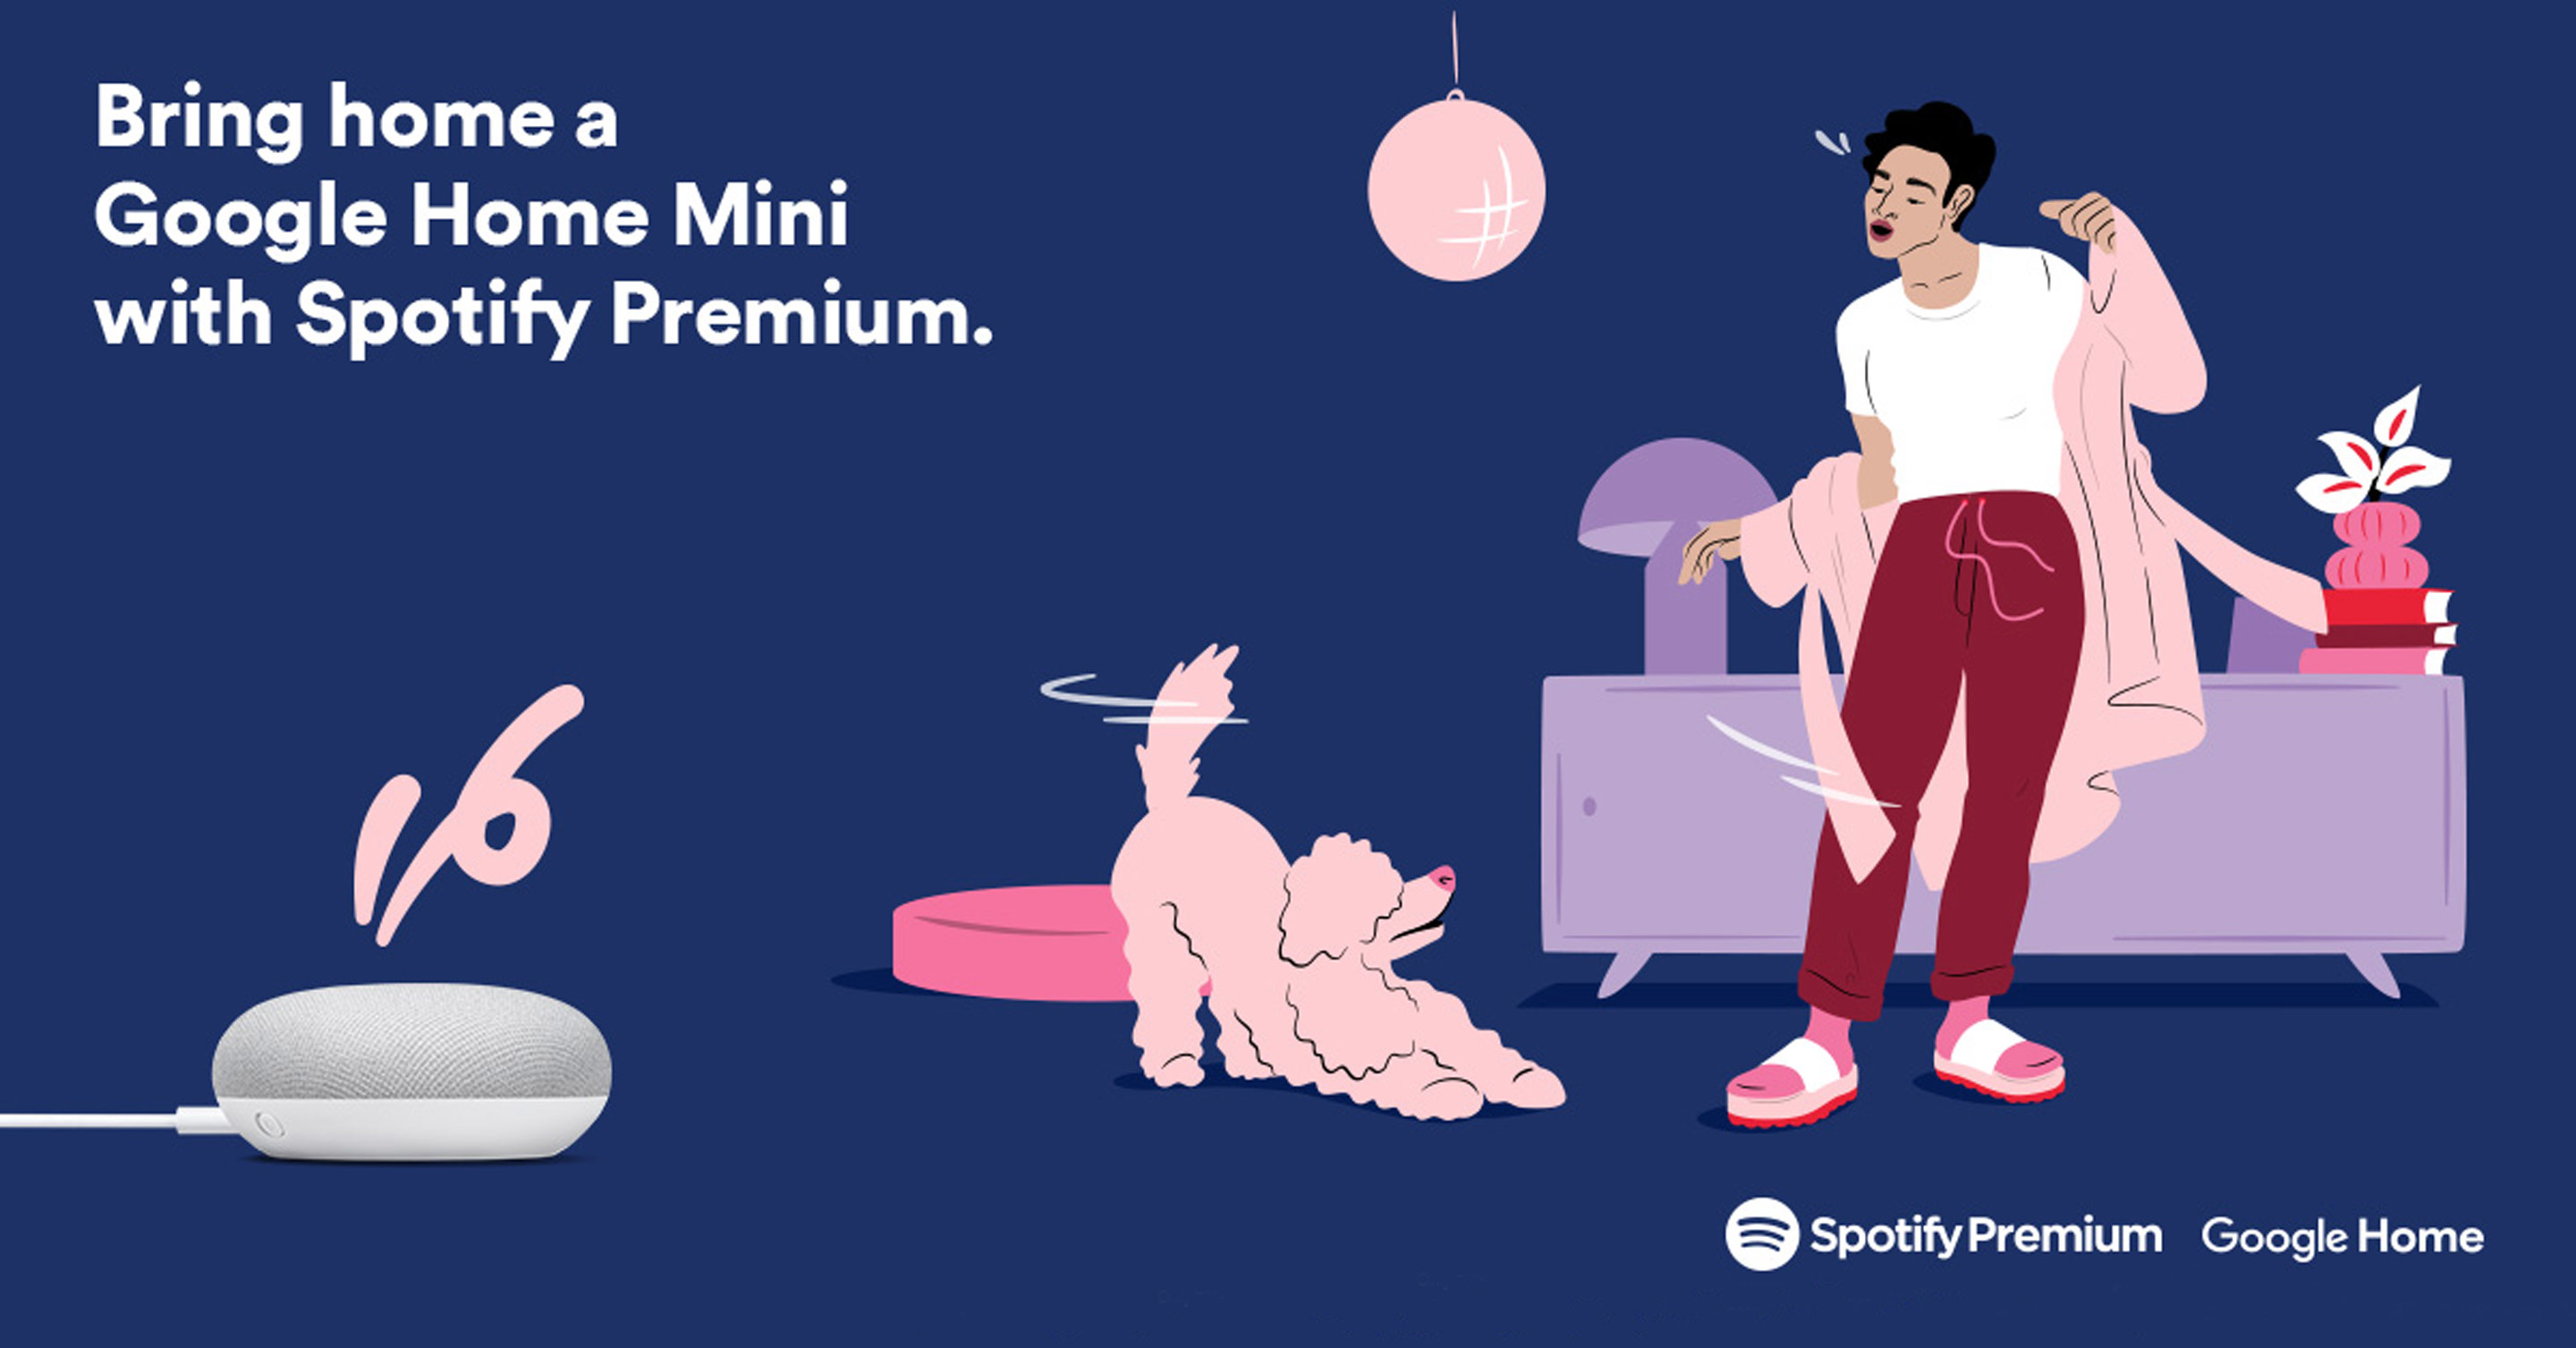 For a limited time, Spotify Premium now comes with a Google Home Mini